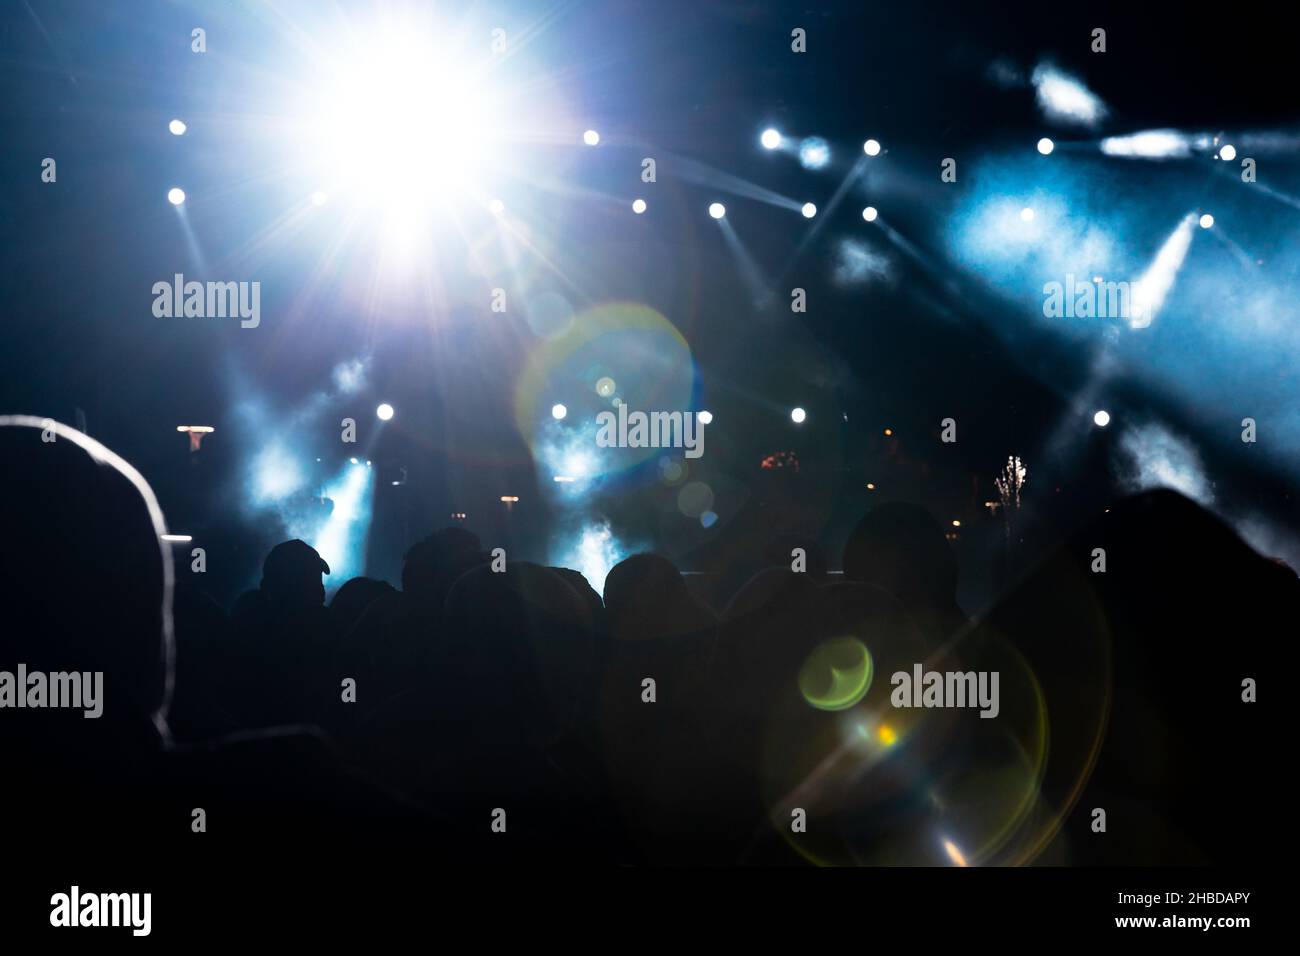 Concert background photo. Spotlight glowing and lens flares in the concert hall. Silhouette of the people. Stock Photo